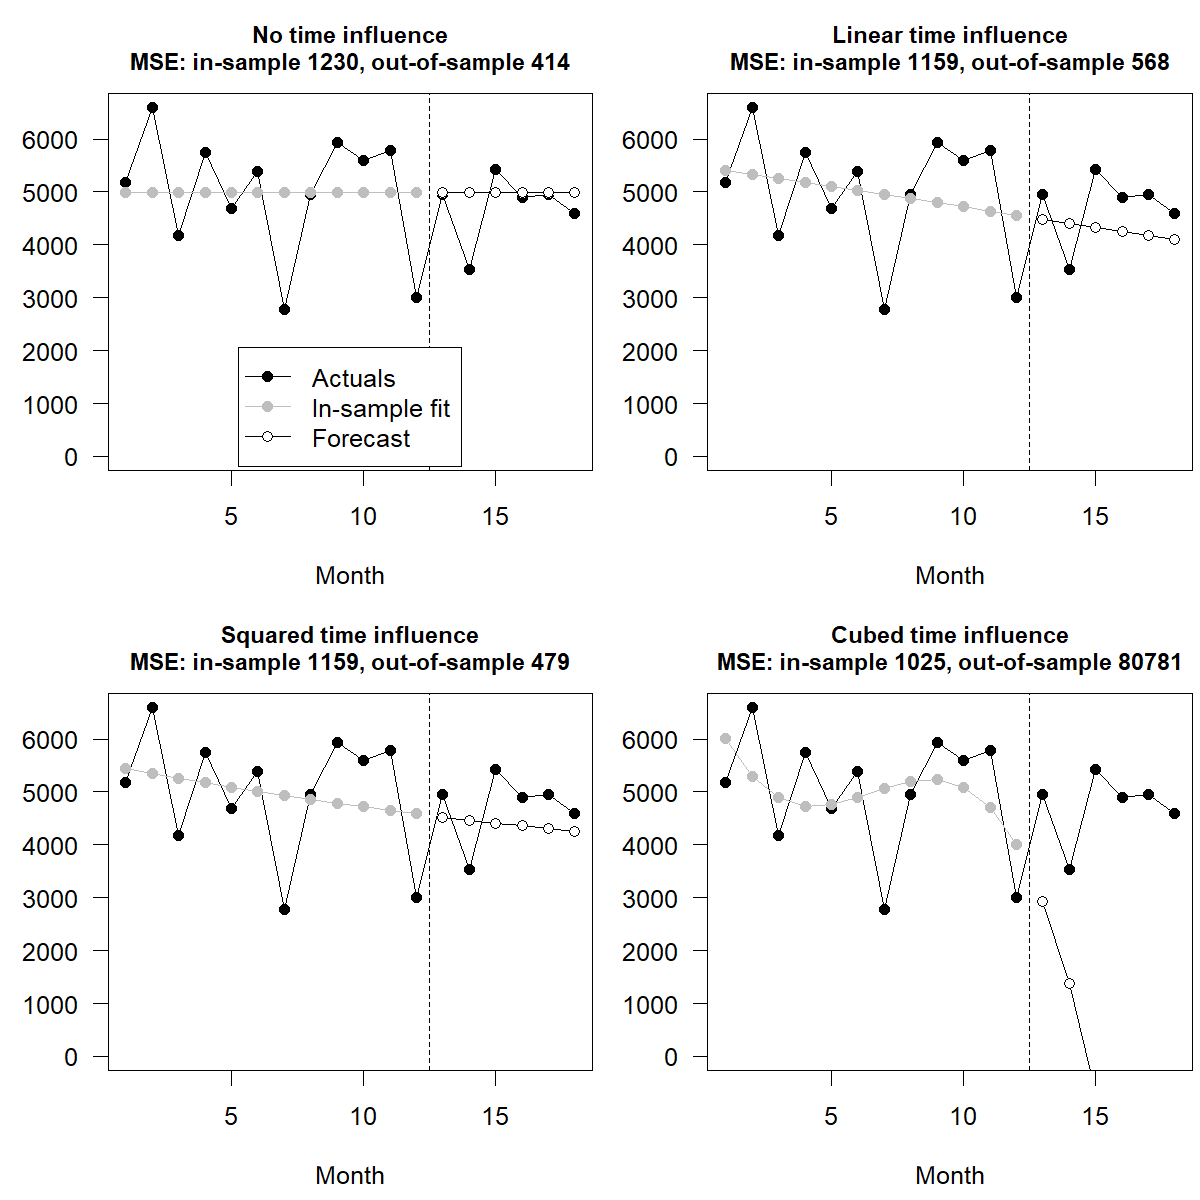 Four panels showing the same time series, along with fits and forecasts for four different models of different complexity. The four models have either no time influence (a flat line), linear time influence (a linear slope), squared time influence (a parabola), or cubed time influence (a third degree curve). In-sample MSE decreases with increasing model complexity, but out-of-sample MSE explodes for the cubed time influence plot. This is an example of overfitting.